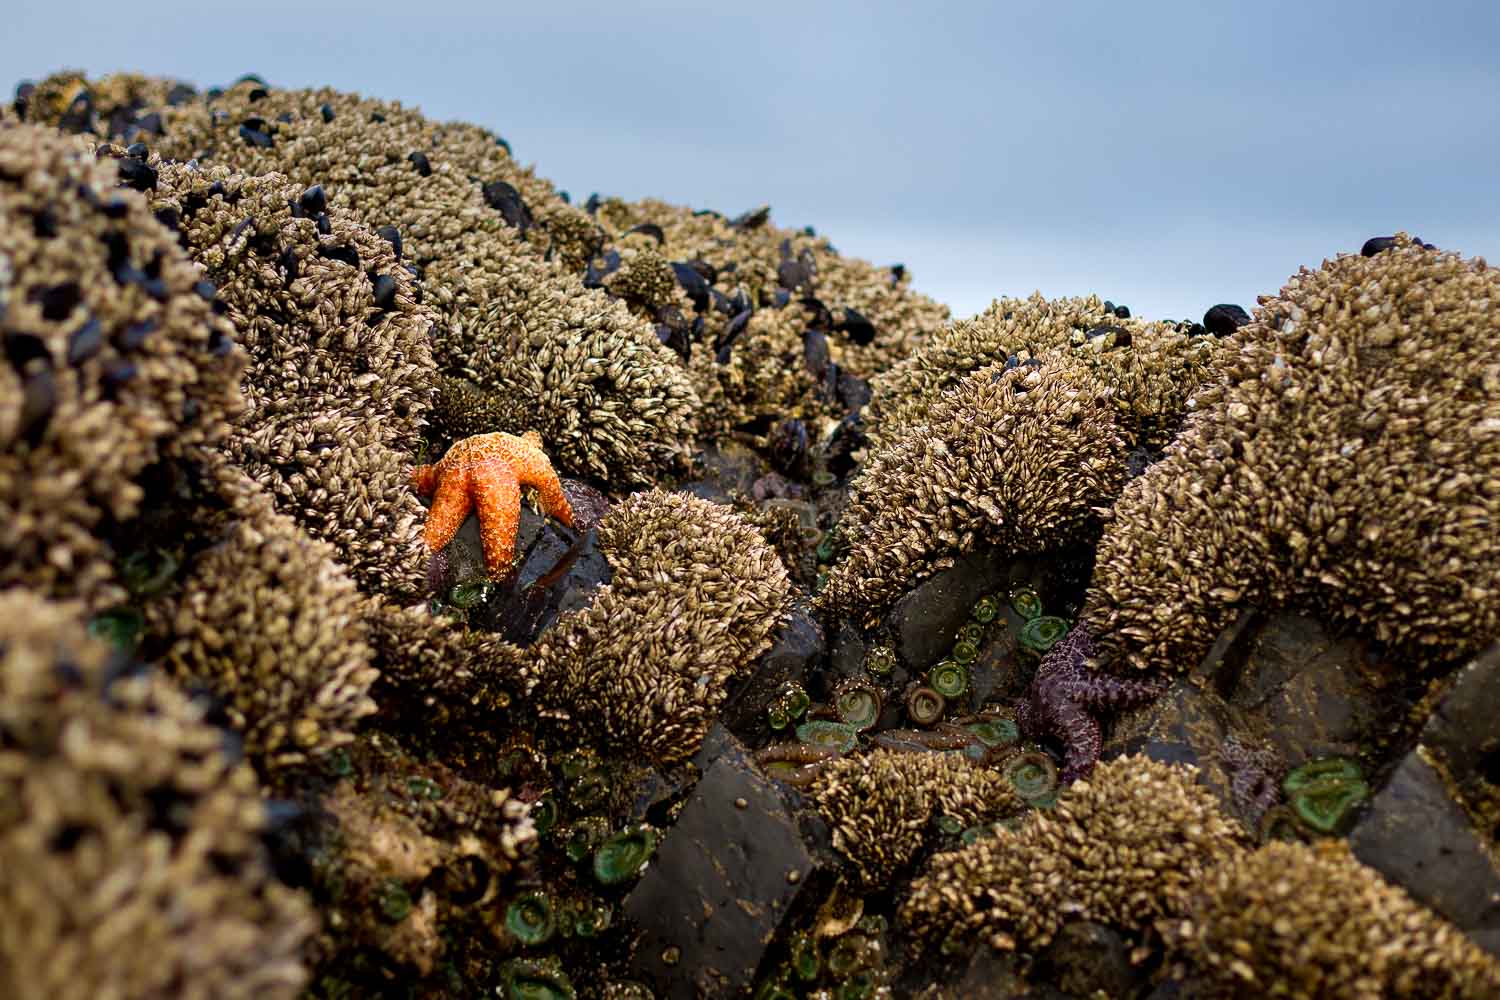 A lone orange starfish among barnacle-covered rocks at low tide.